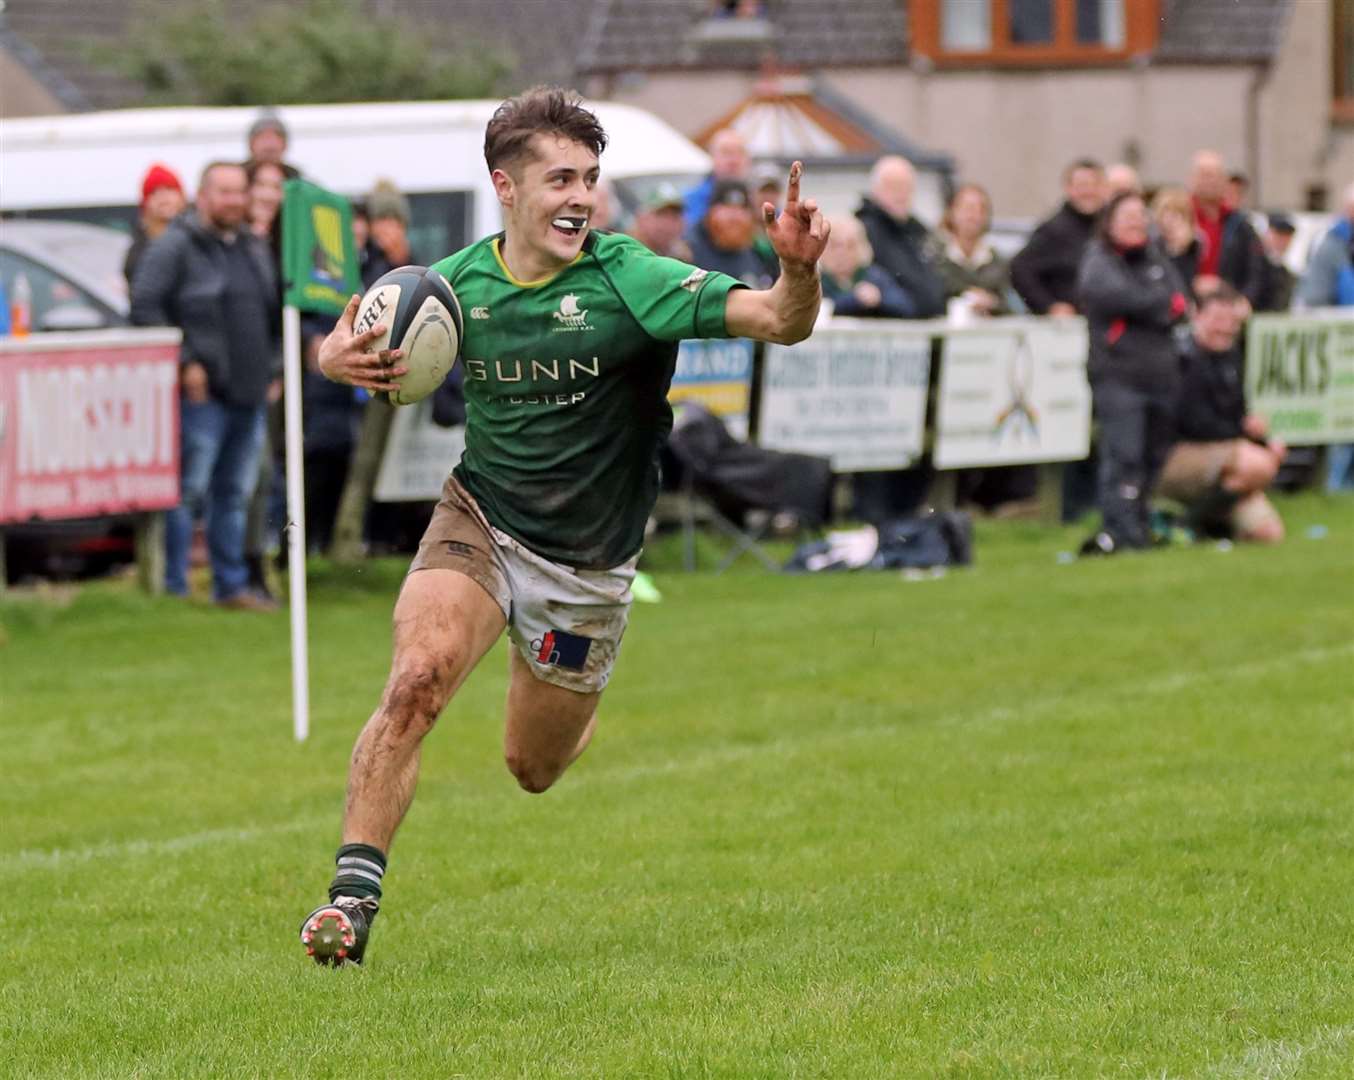 Euan Macdonald crosses the try line for his third try and starts to celebrate before touching down. Picture: James Gunn